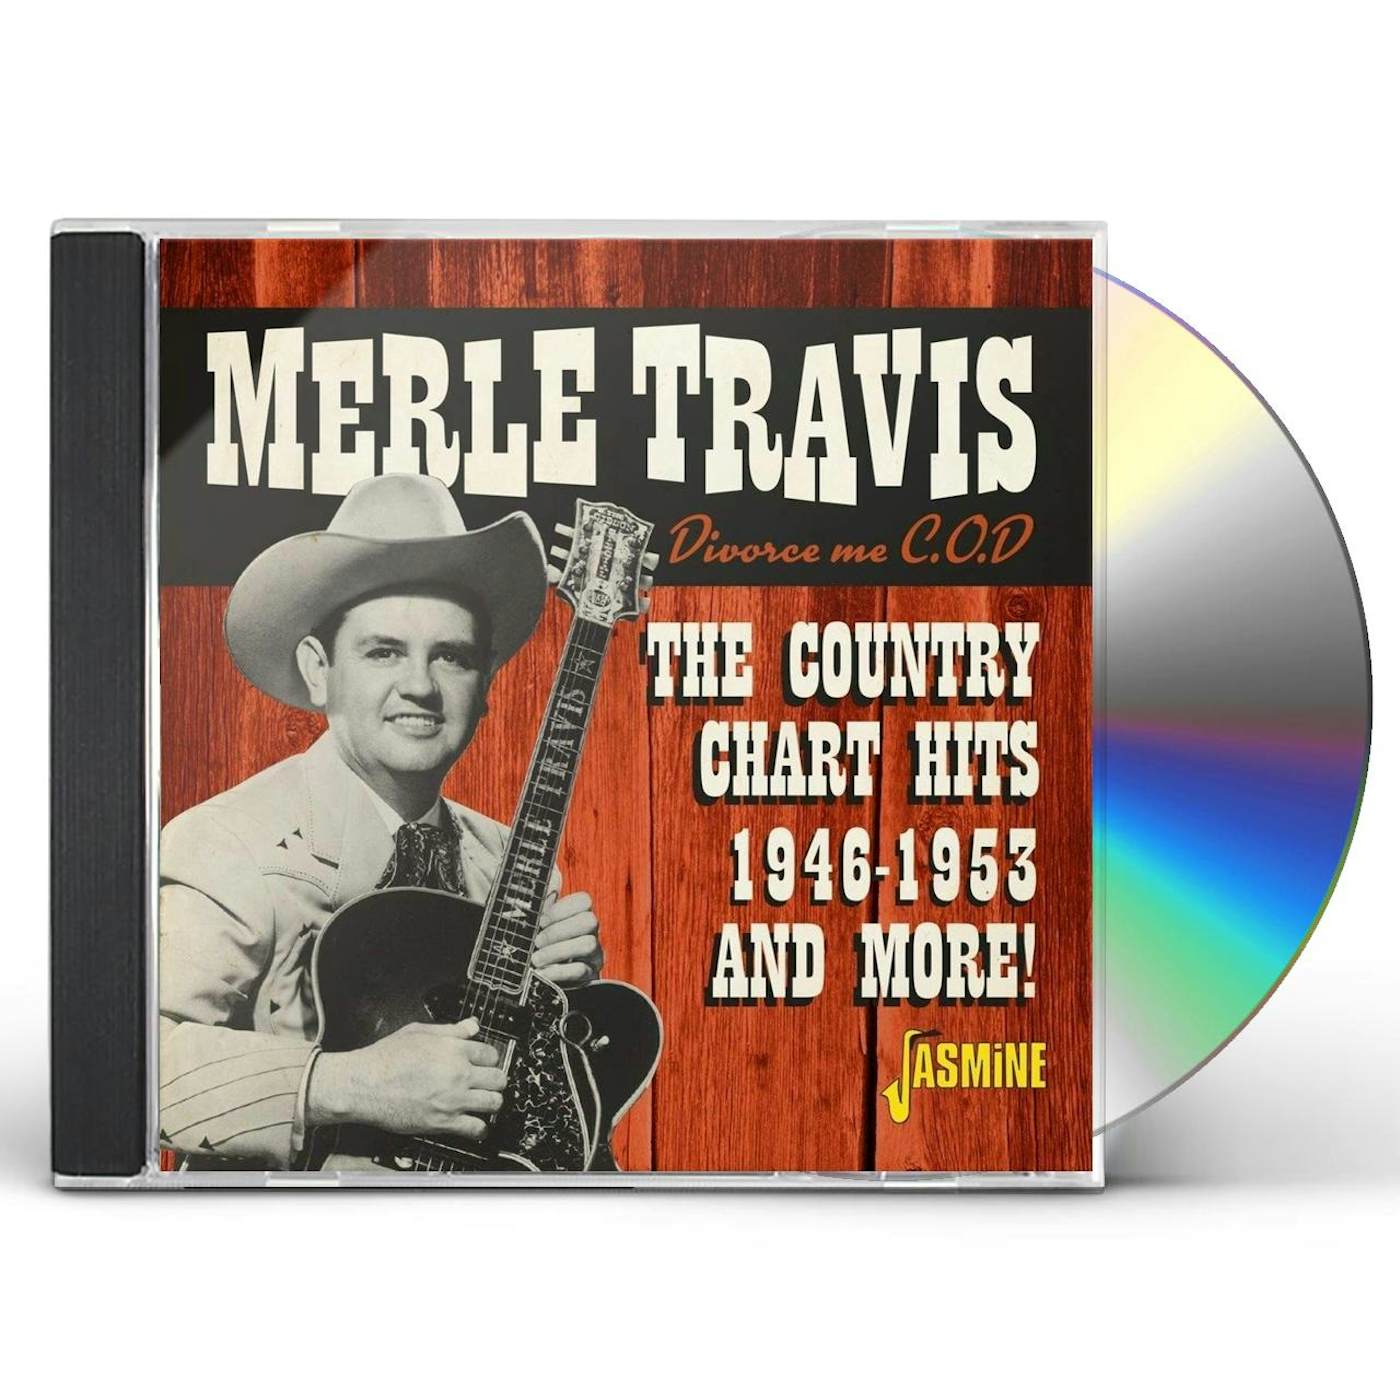 Merle Travis DIVORCE ME C.O.D. THE COUNTRY CHART HITS 1946-1953 CD